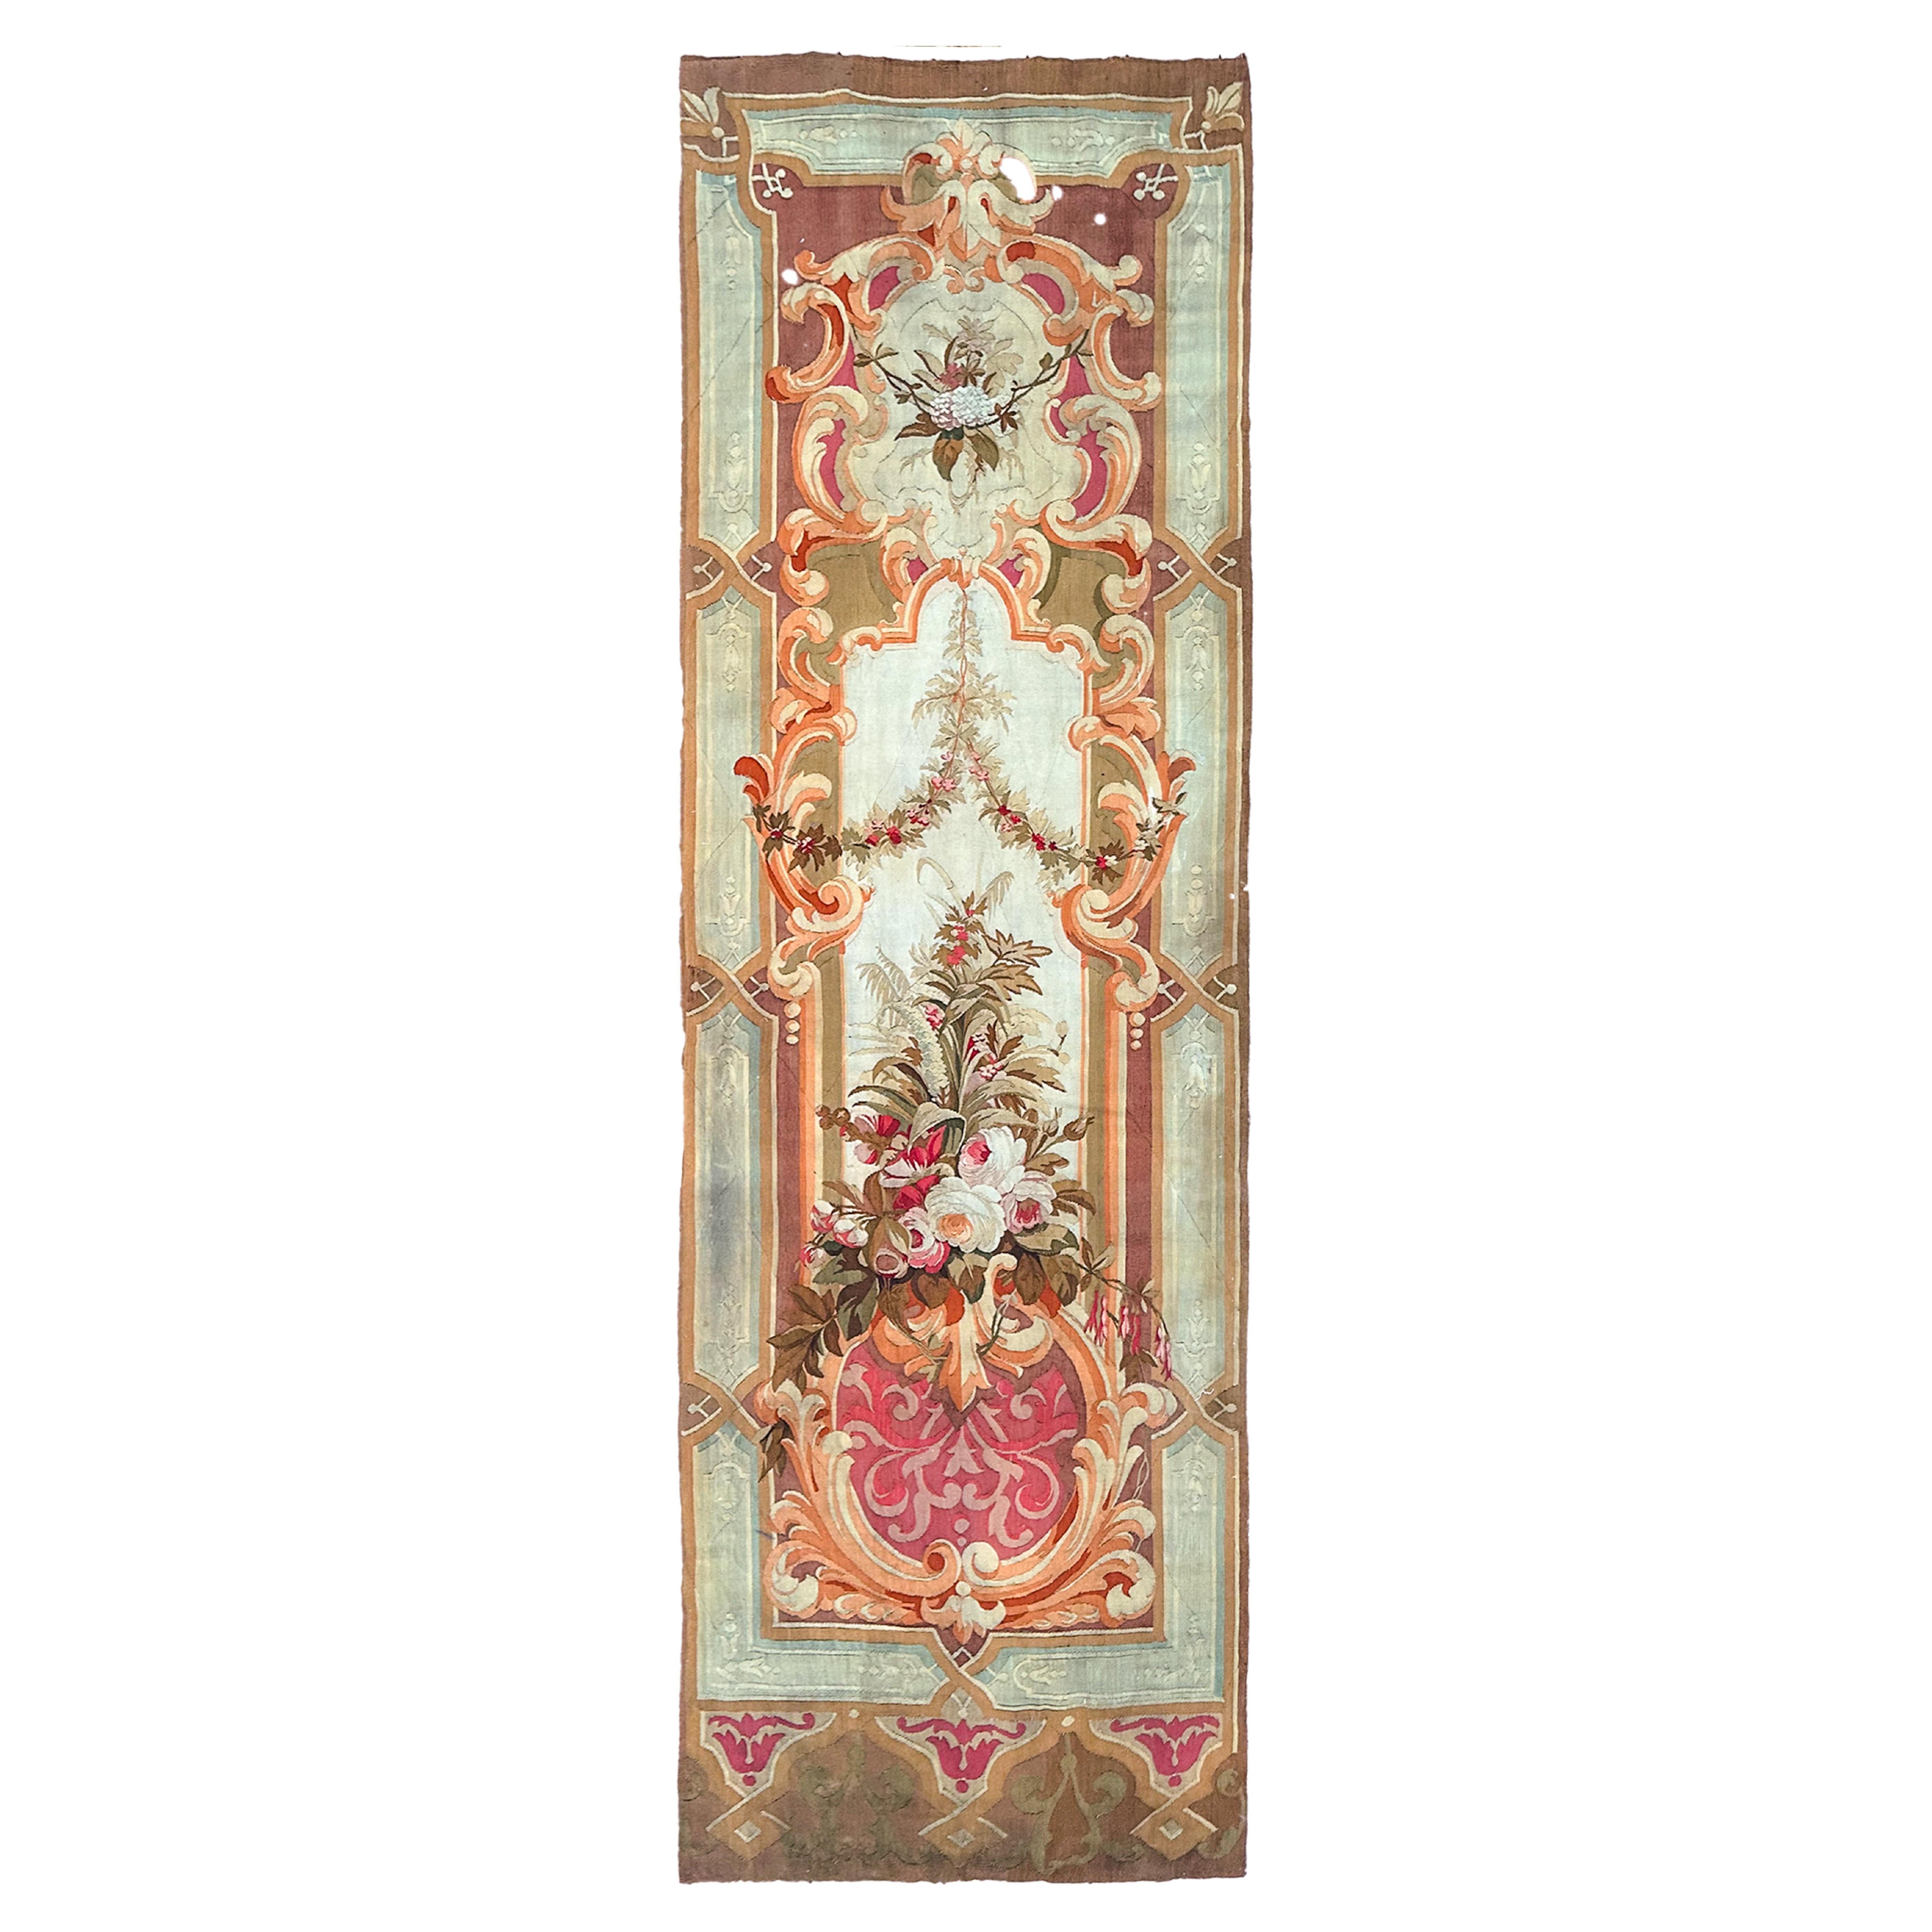 1920 Antique French Aubusson Tapestry Rug Floral Vase Runner 3x10 1880 97x287cm For Sale